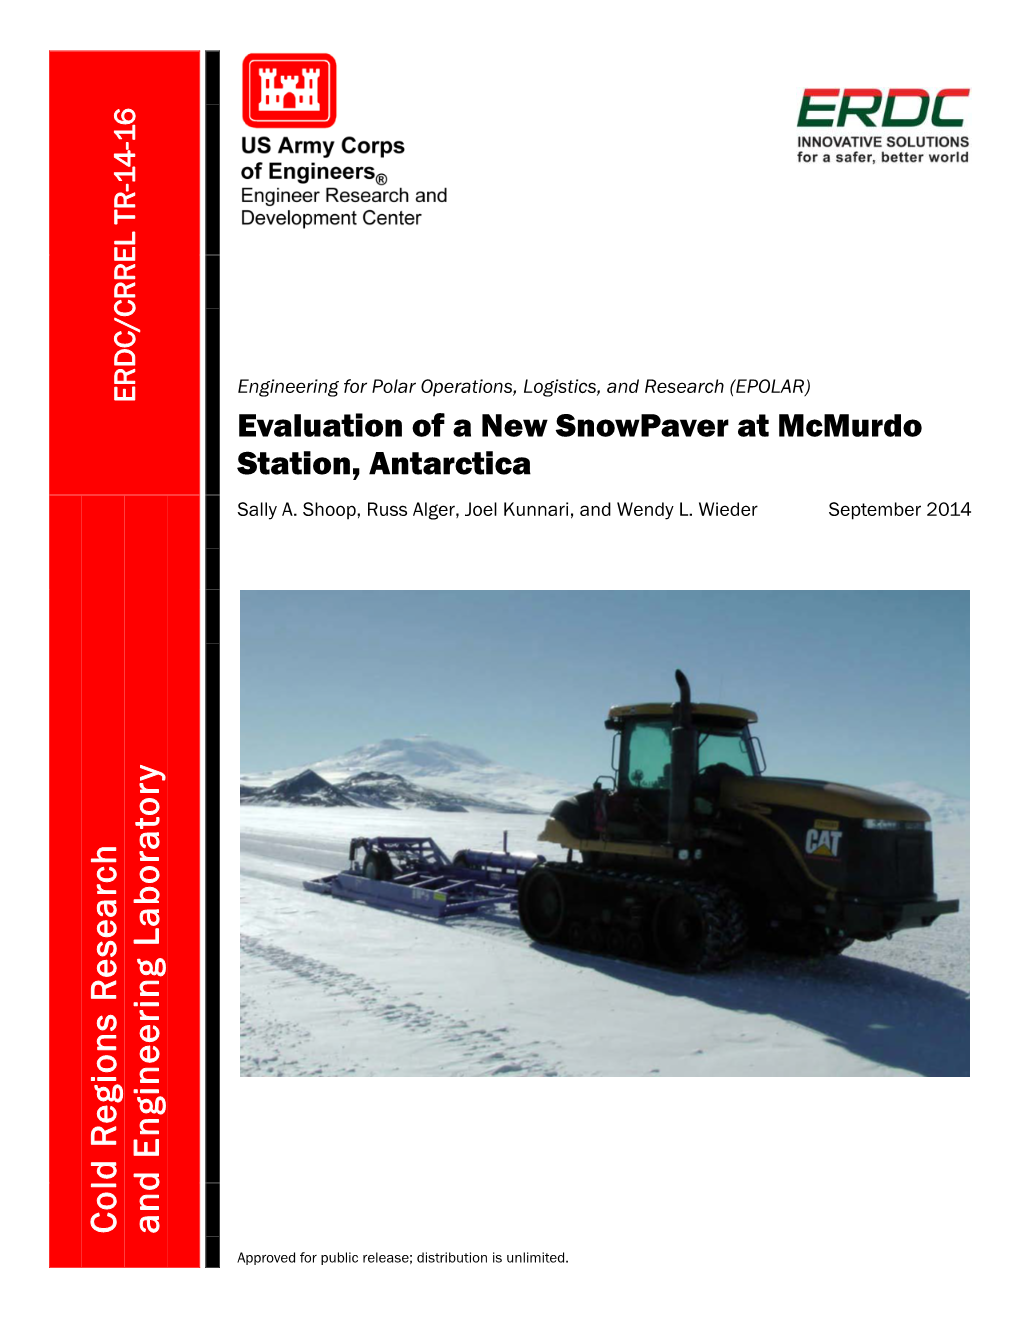 Evaluation of a New Snowpaver at Mcmurdo Station, Antarctica